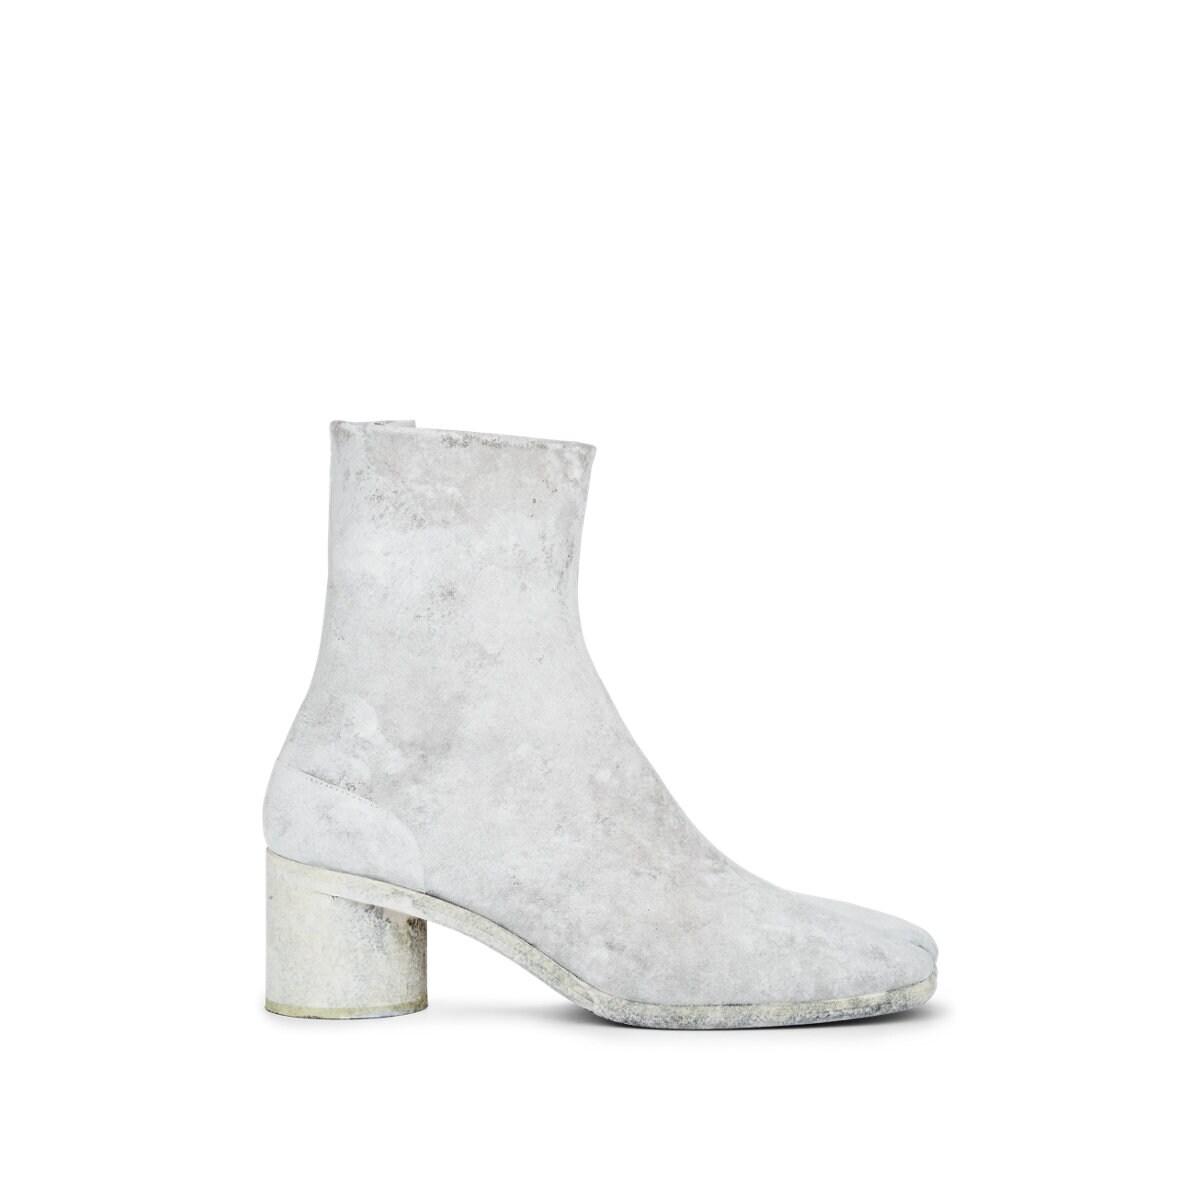 Maison Margiela Tabi Painted-leather Boots in White for Men - Lyst